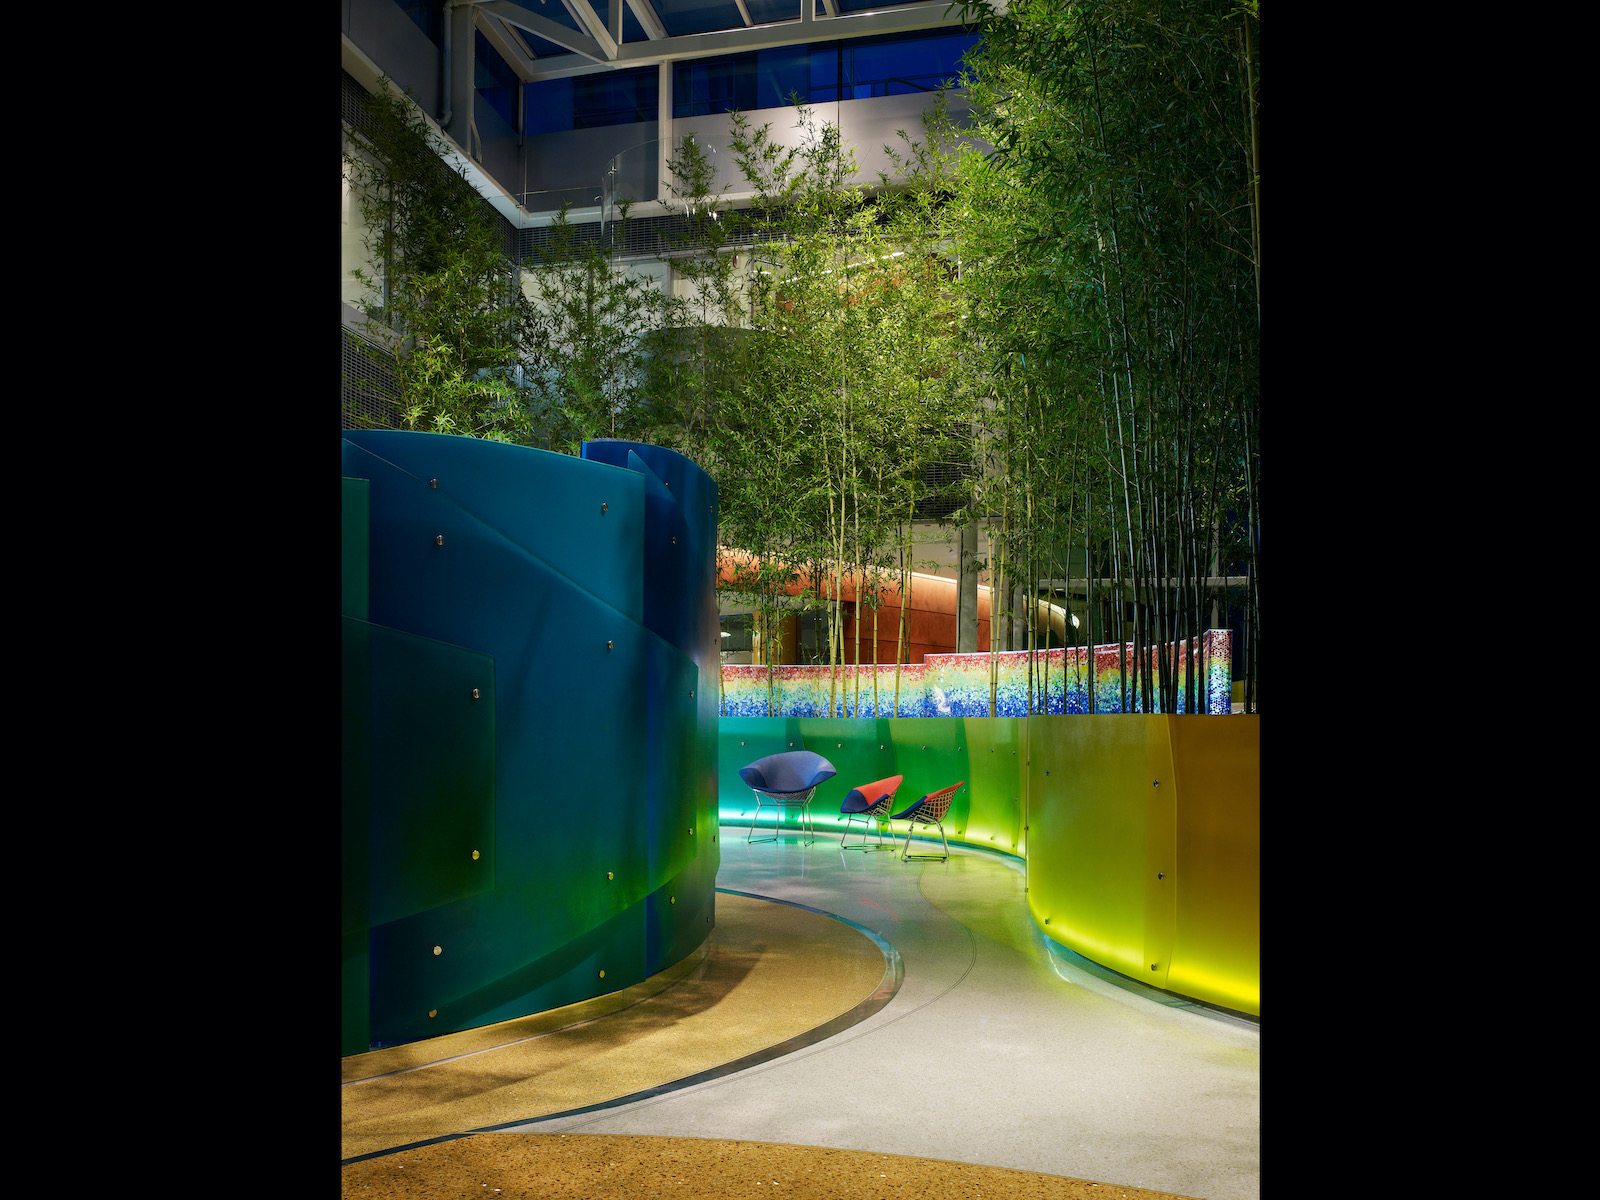 Chicago Childrens Hospital Sky Garden - Turnkey Installation for Quality Experience